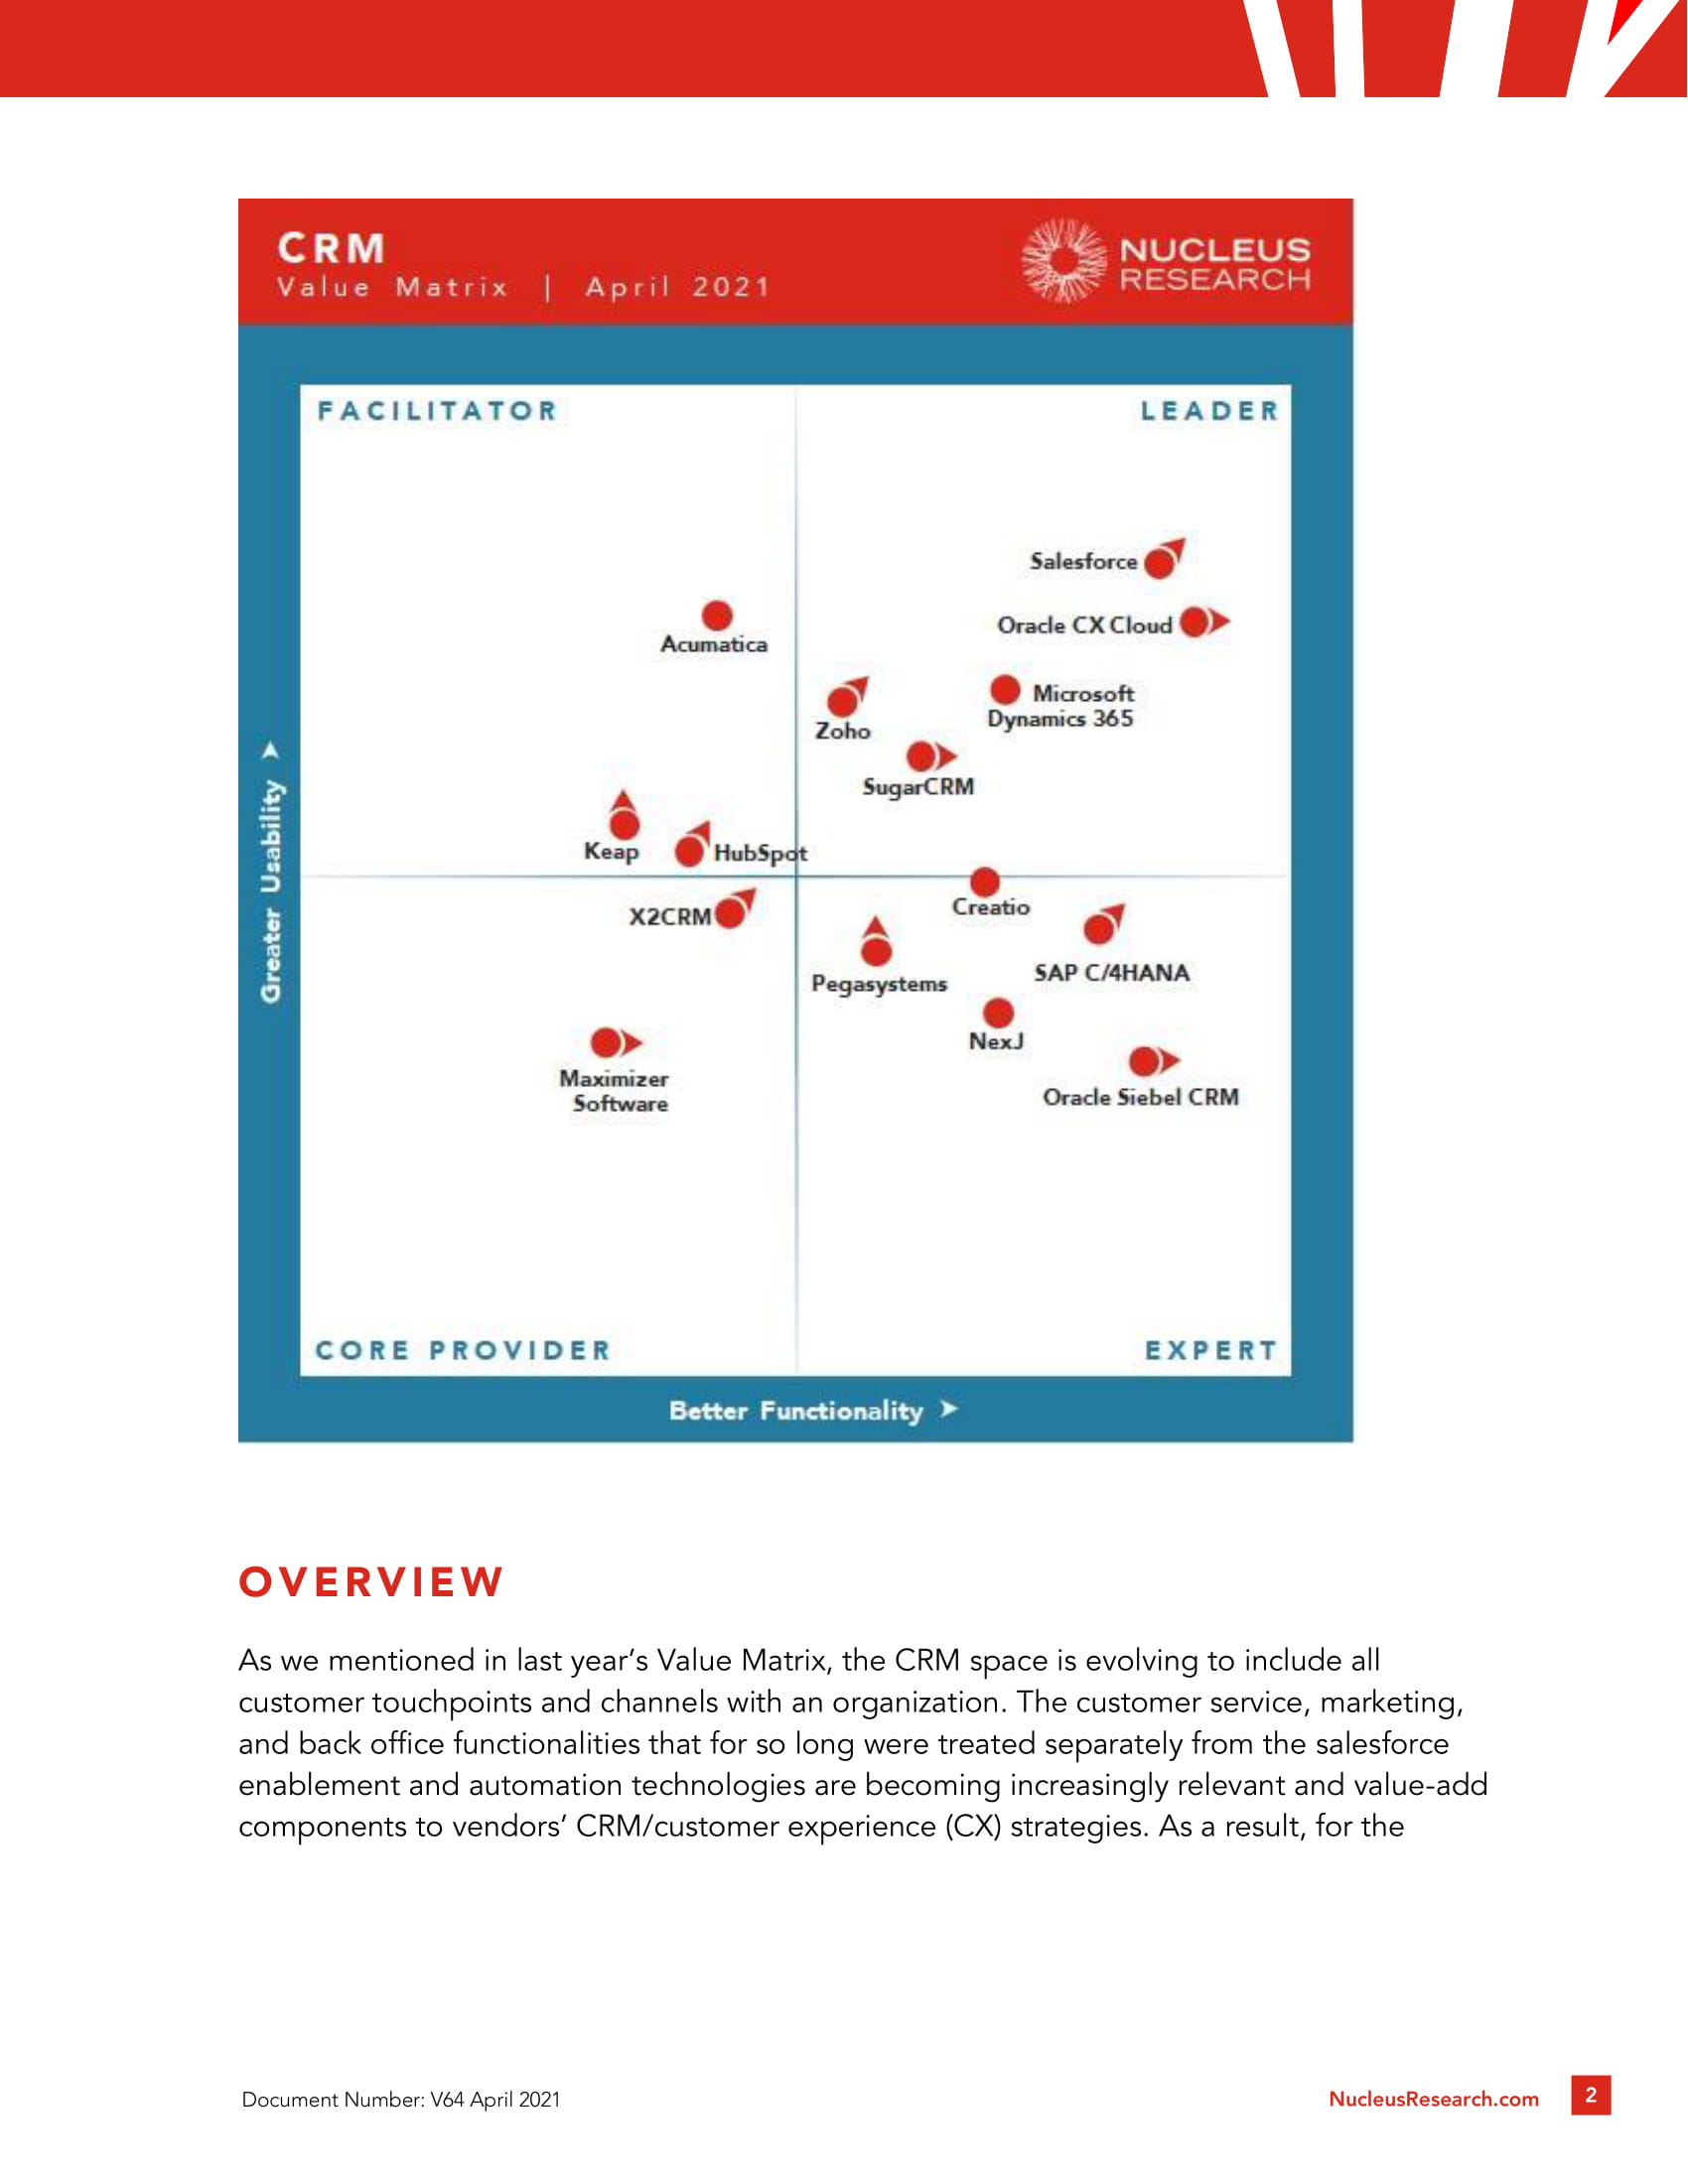 Cloud CRM Solutions: See How Top Vendors Compare, page 1